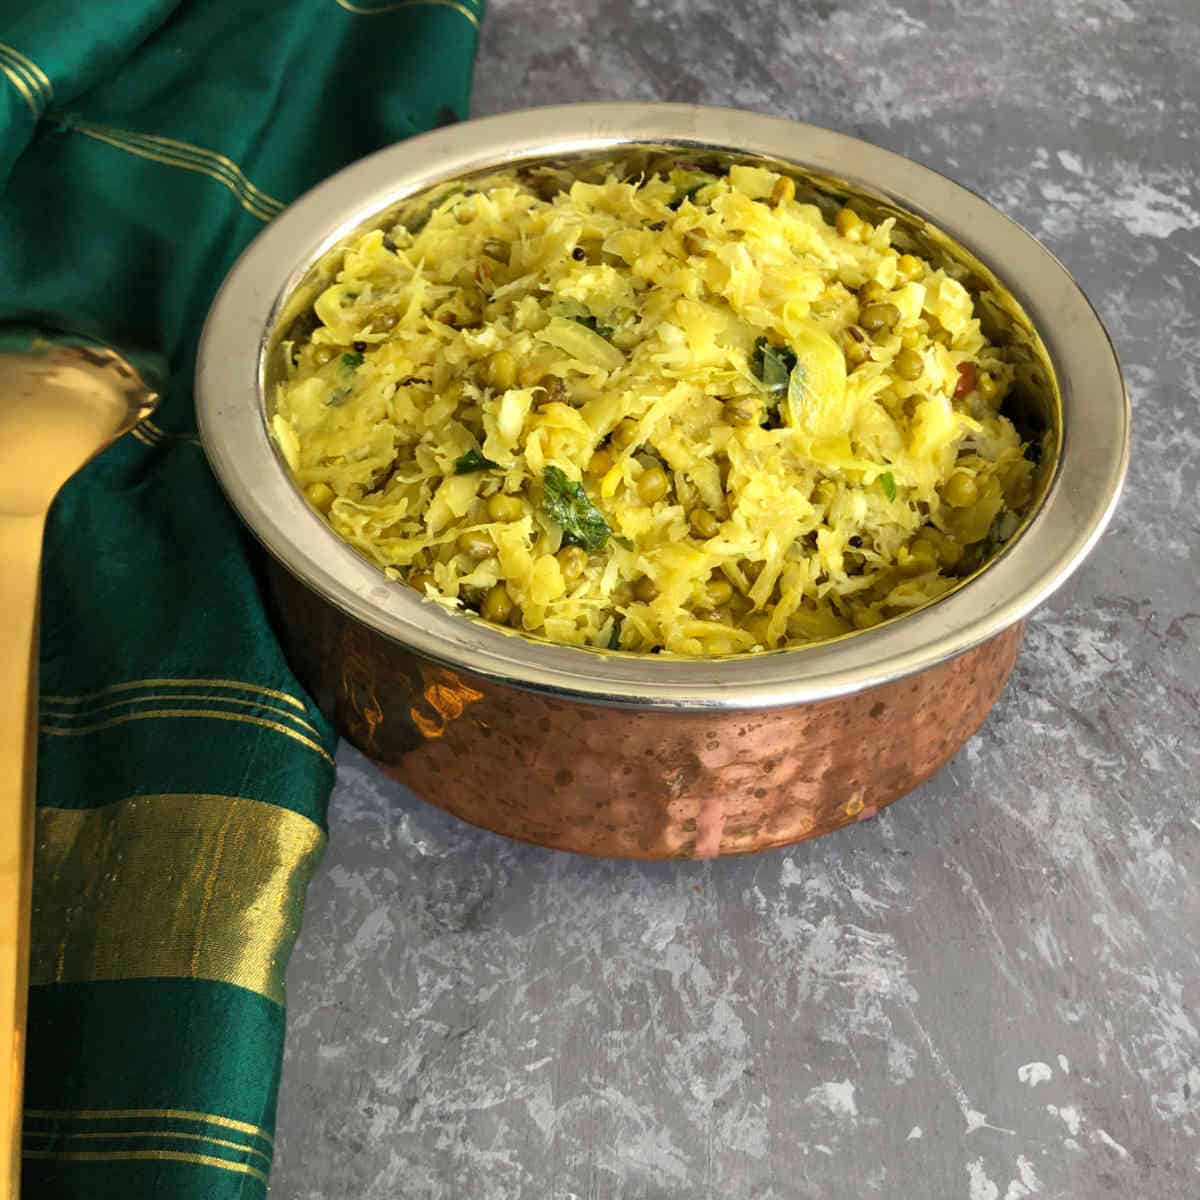 Cabbage poriyal placed in a traditional copper vessel.